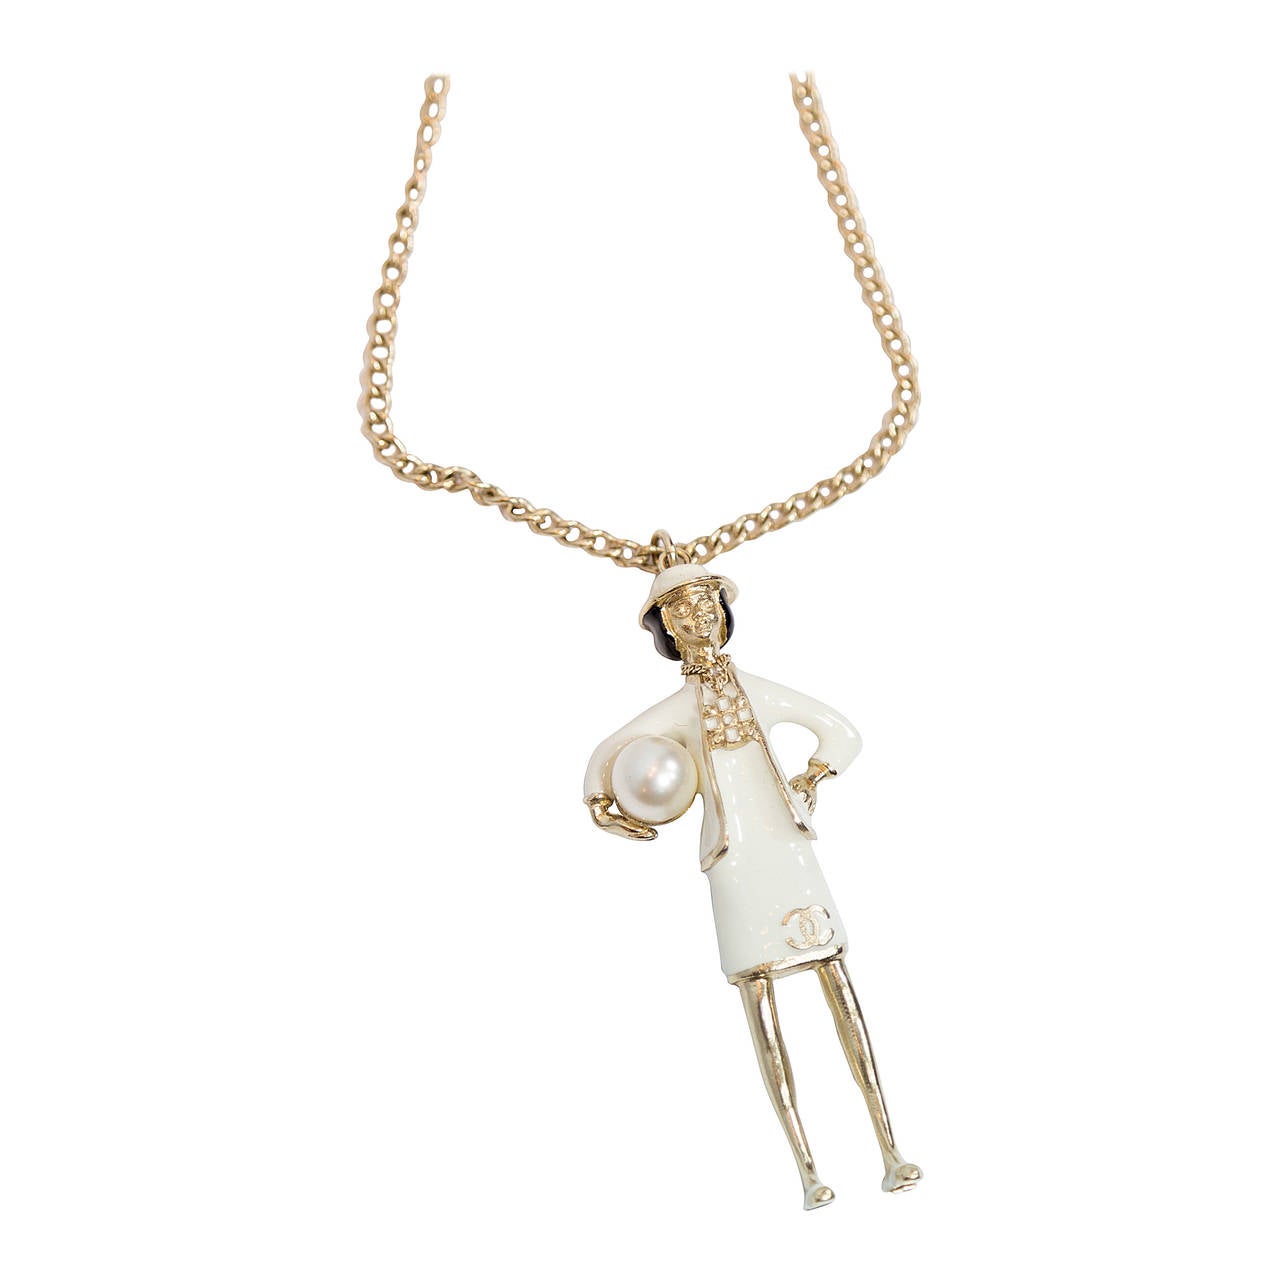 Chanel miniature Coco Chanel figurine necklace at 1stDibs